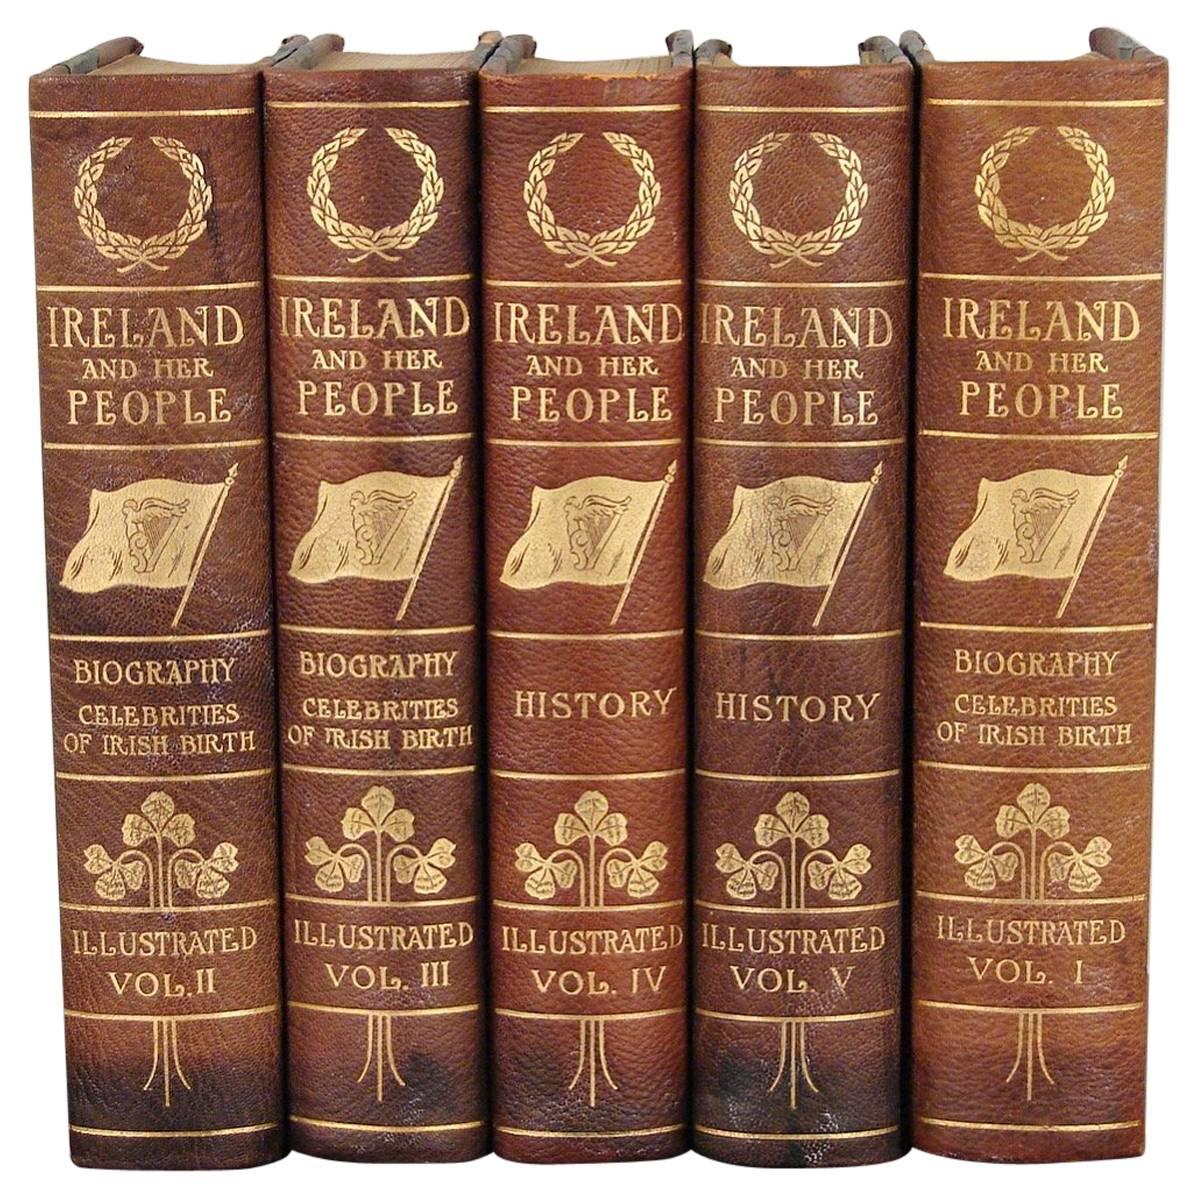 Ireland and Her People Five Volumes by Thomas Fitzgerald Leather-Bound